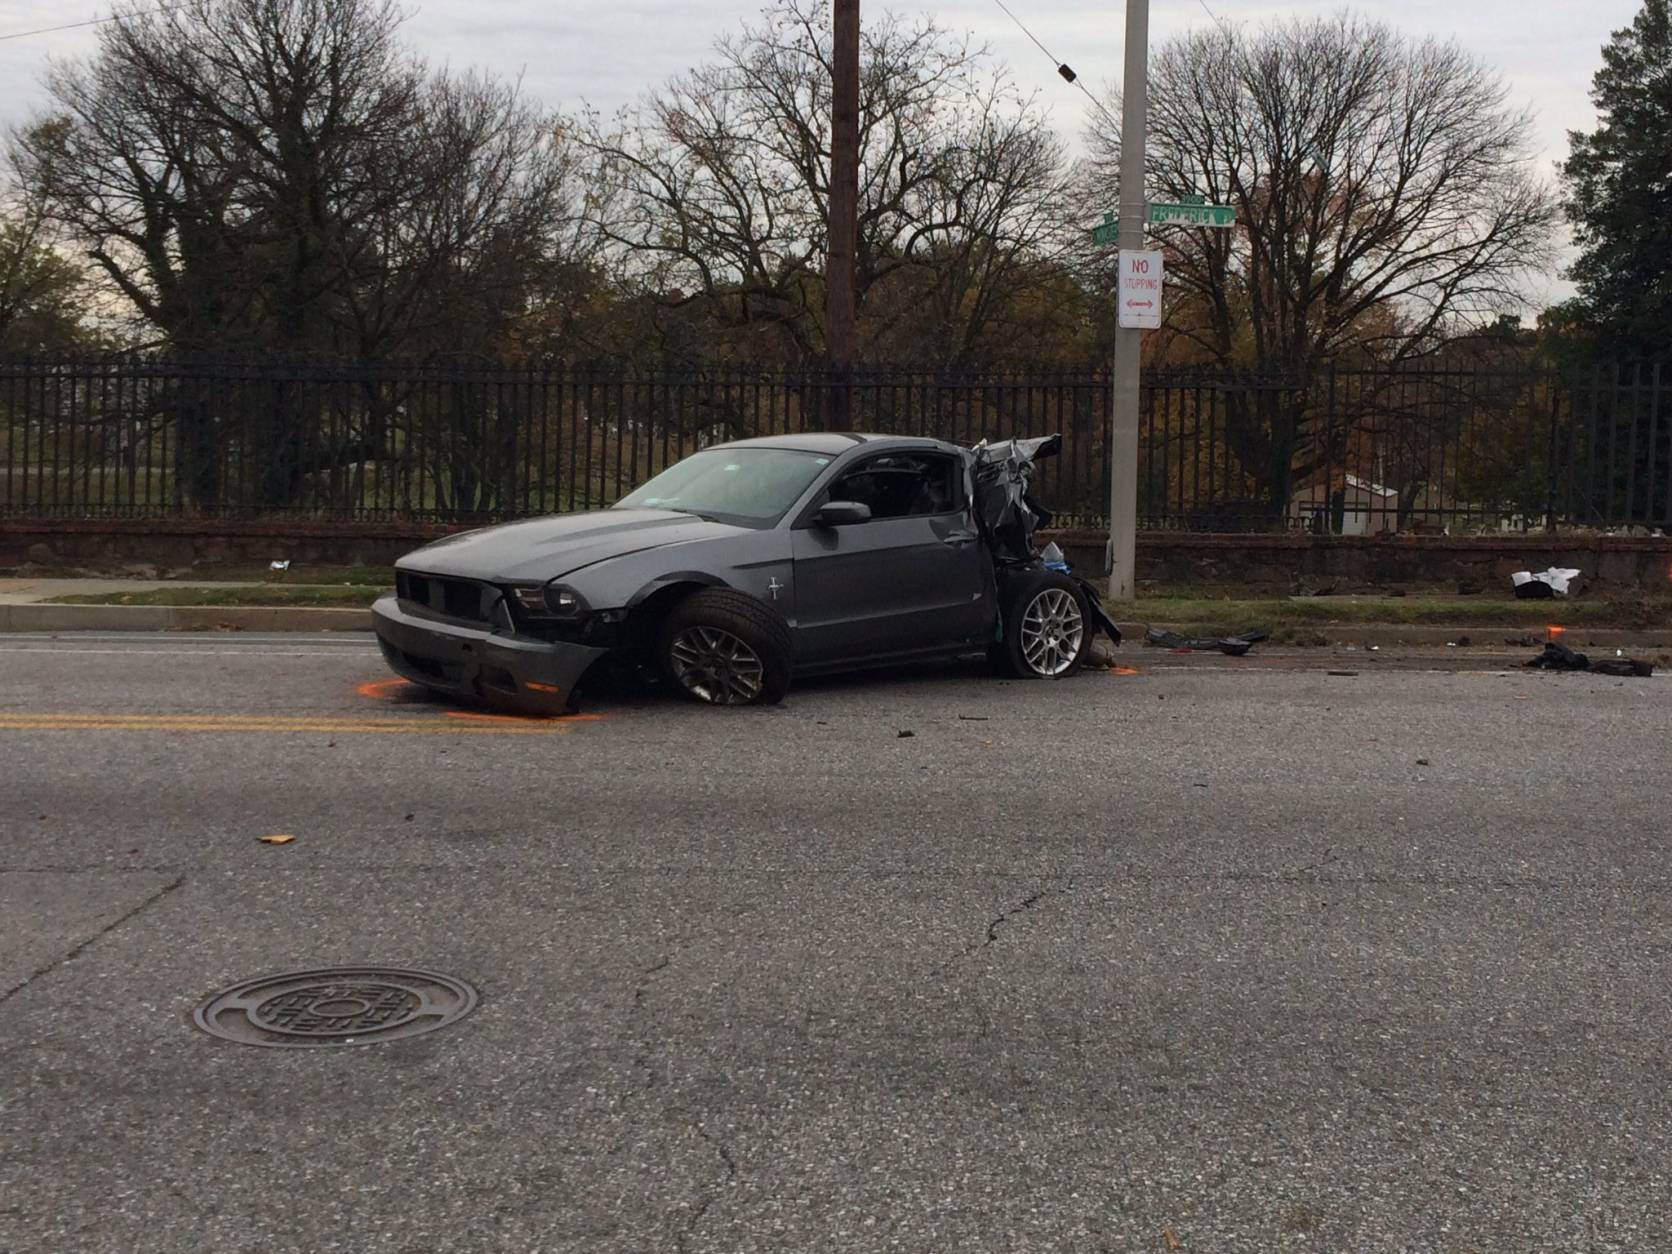 This car is part of the Baltimore crash scene involving a school bus and an MTA bus. (WTOP/Nick Iannelli)